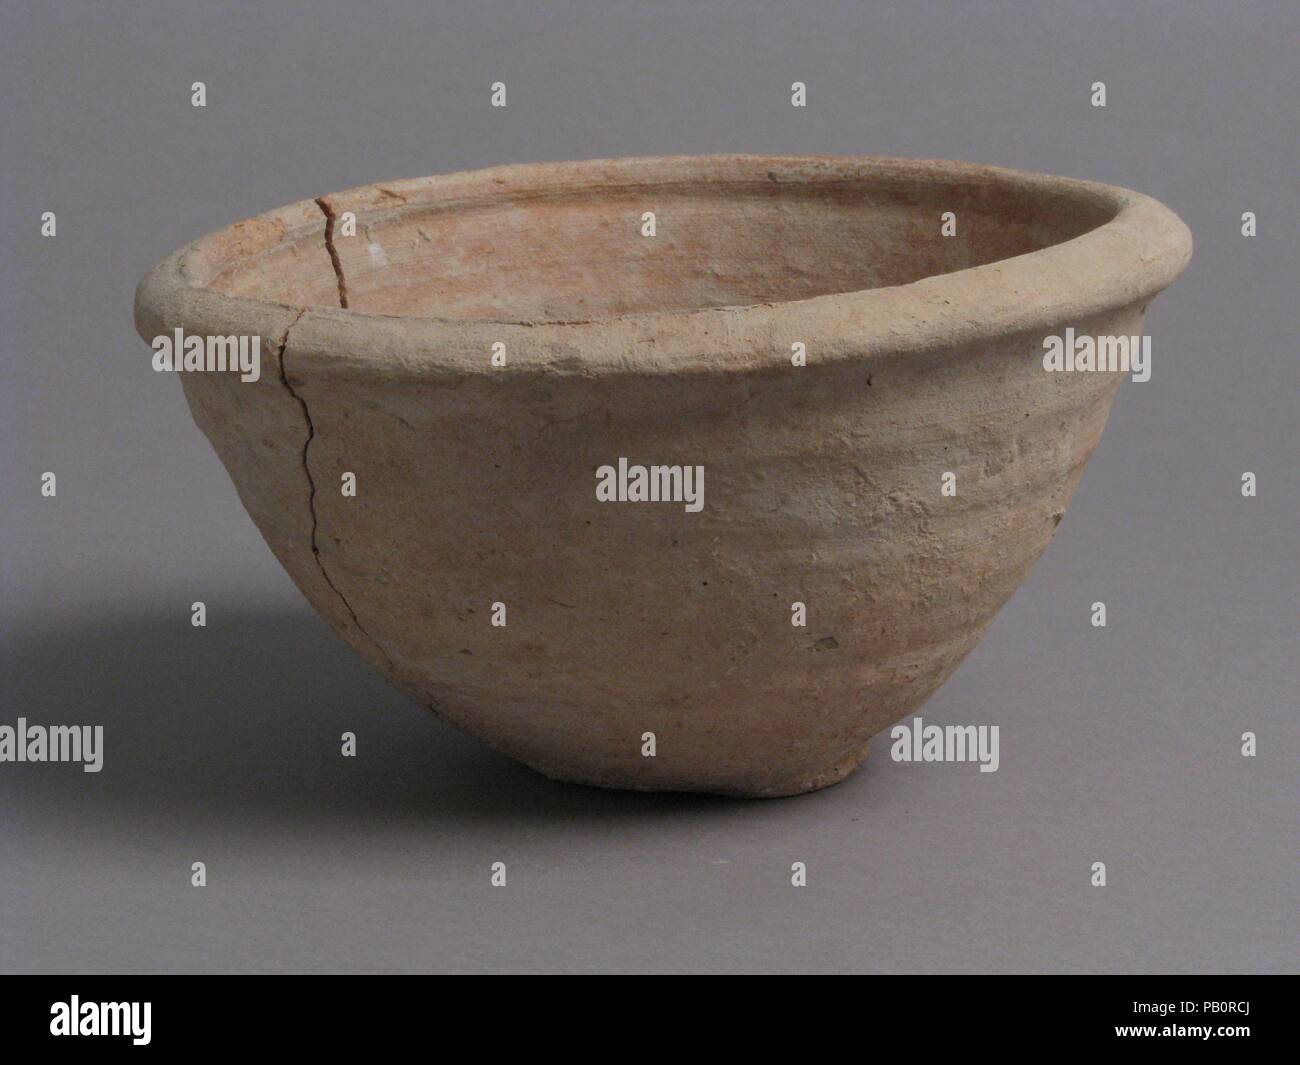 Bowl. Culture: Coptic. Dimensions: Overall: 3 7/16 x 6 9/16 in. (8.8 x 16.7 cm). Date: 4th-7th century. Museum: Metropolitan Museum of Art, New York, USA. Stock Photo